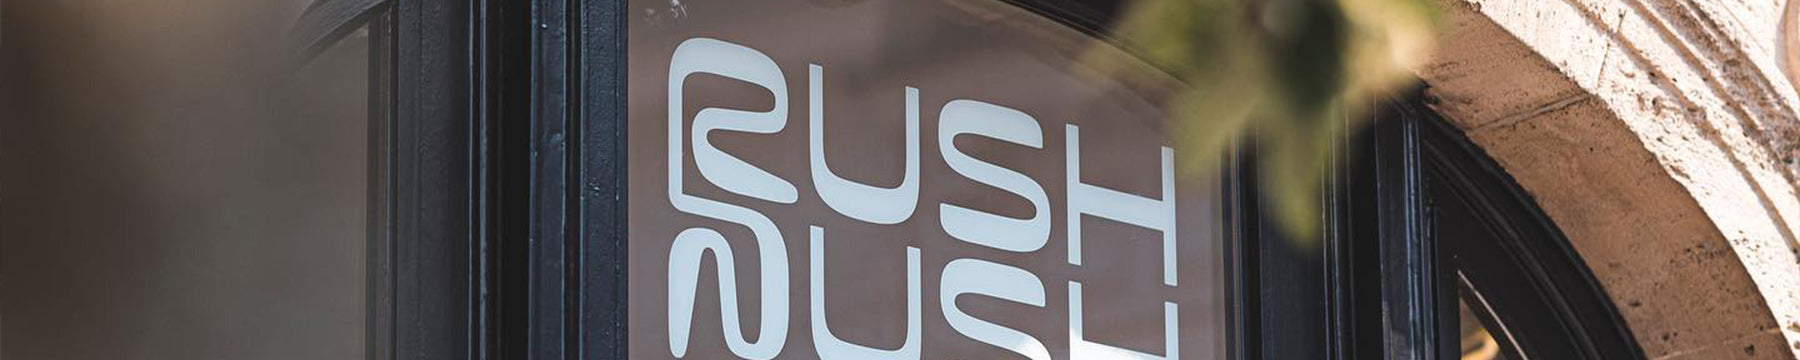 Hidden Rush Rush Groundstate Red Bank Cult And We Are Here Coffee Roasters Tasting Notes